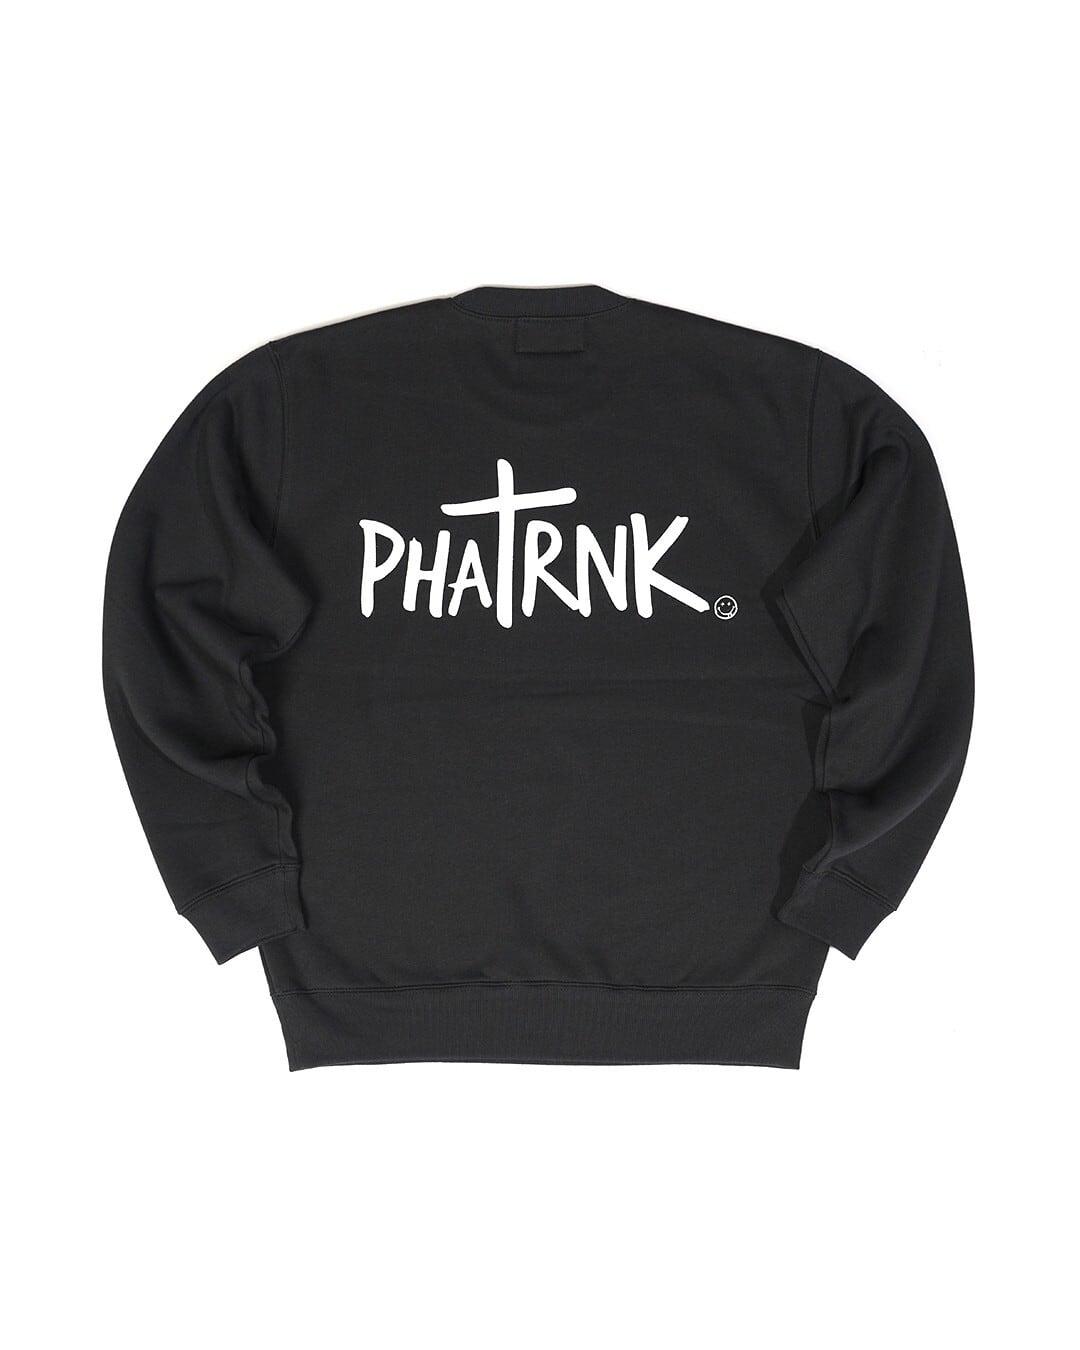 PHATRNK OFFICIAL ONLINE STORE